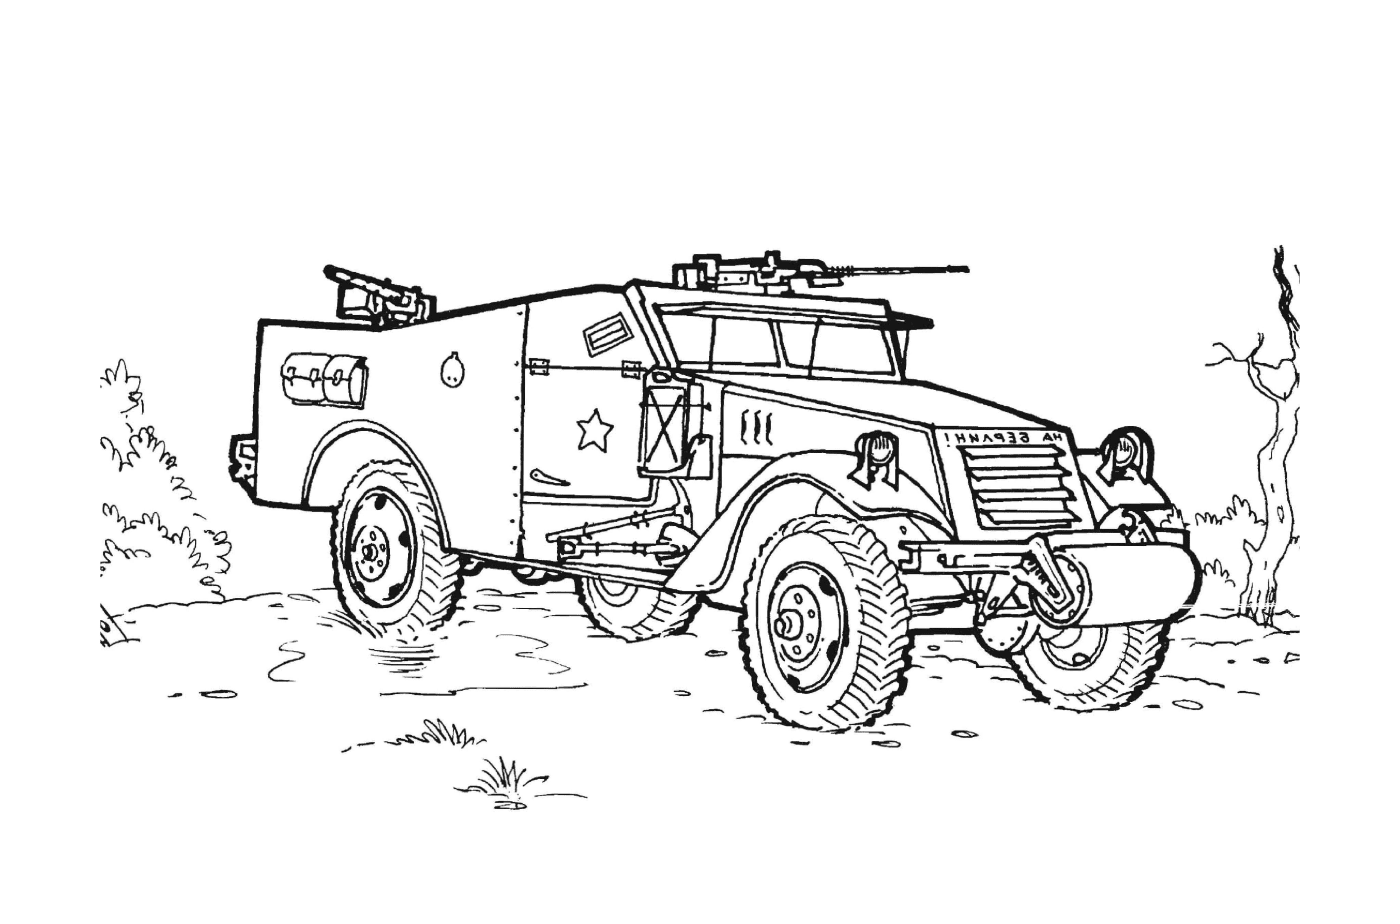  Armed military vehicle 